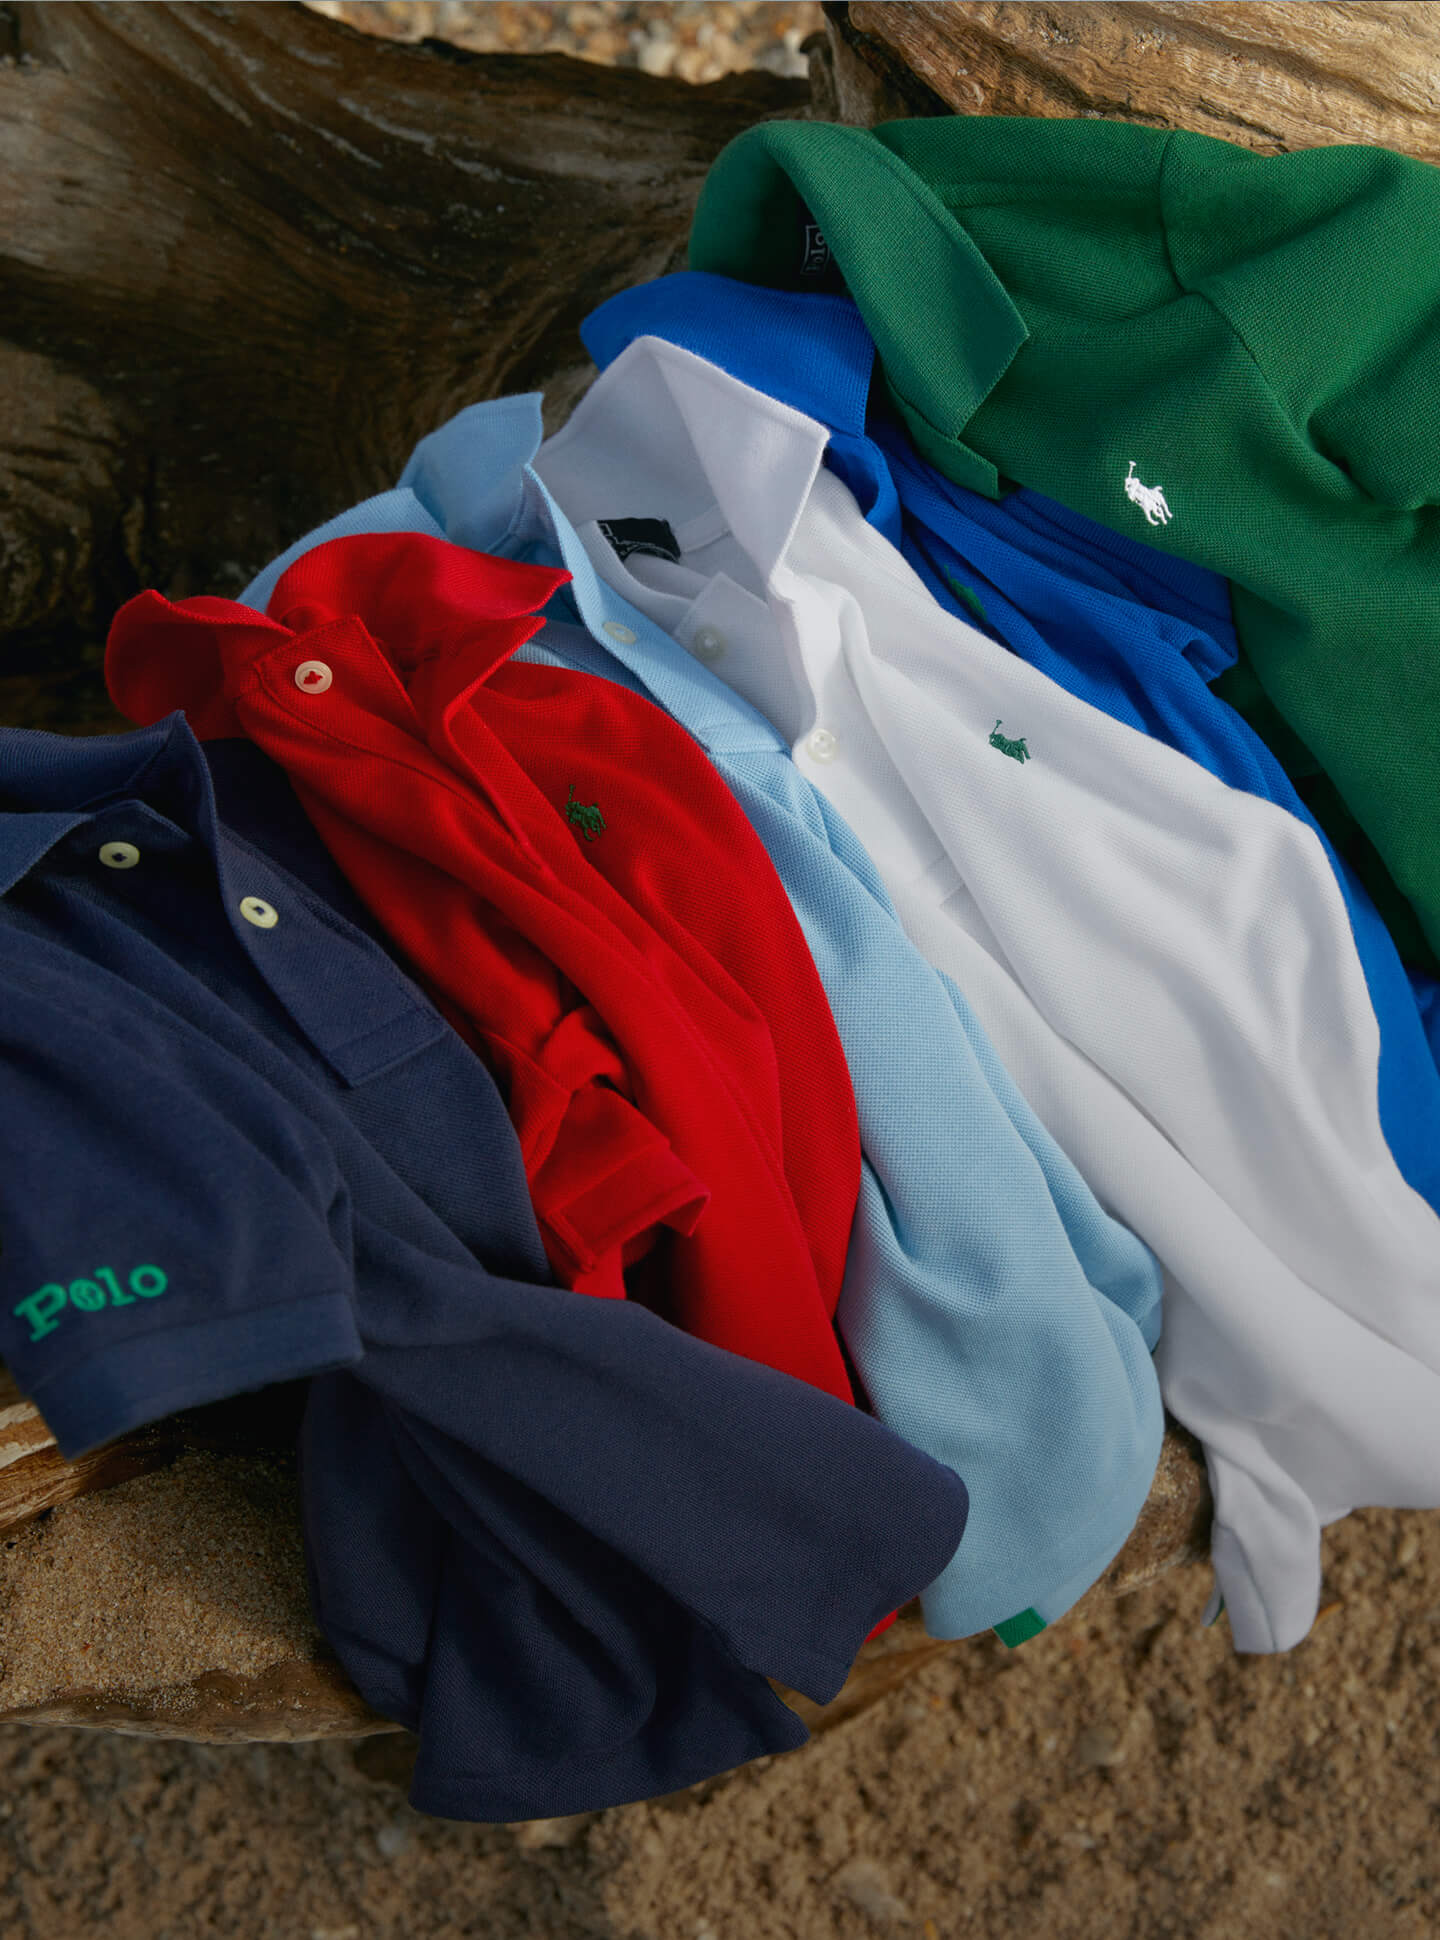 Earth Polo shirts in various colors on sandy beach.